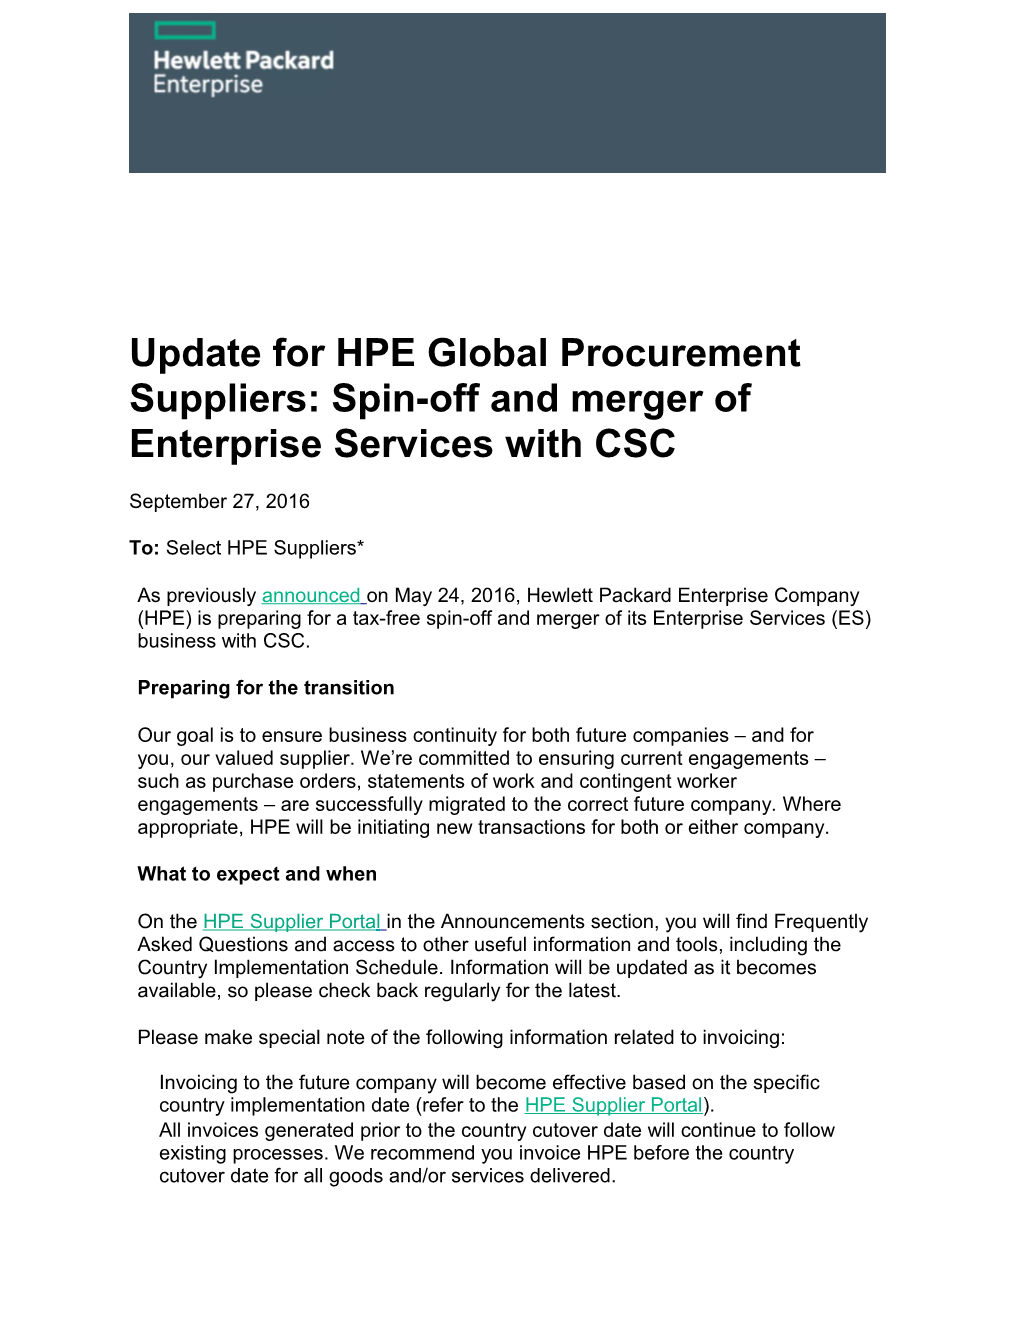 Update for HPE Global Procurement Suppliers: Spin-Off and Merger of Enterprise Services